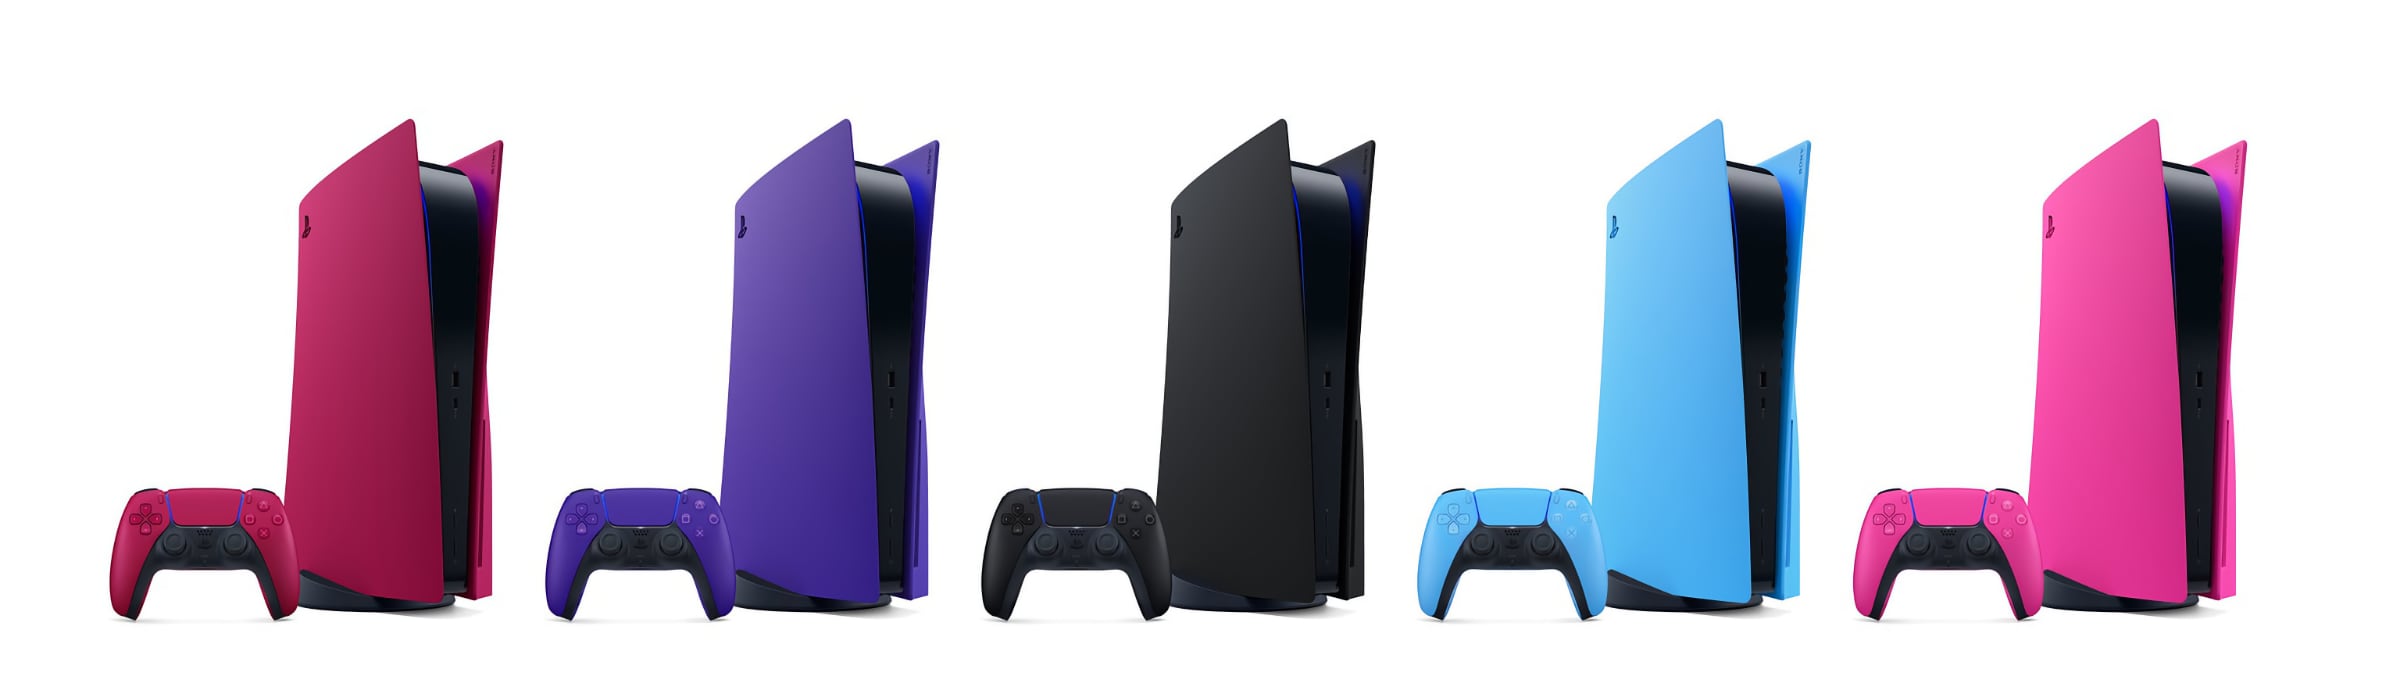 PlayStation 5 and DualSense will soon come in black and four colors -  FlatpanelsHD